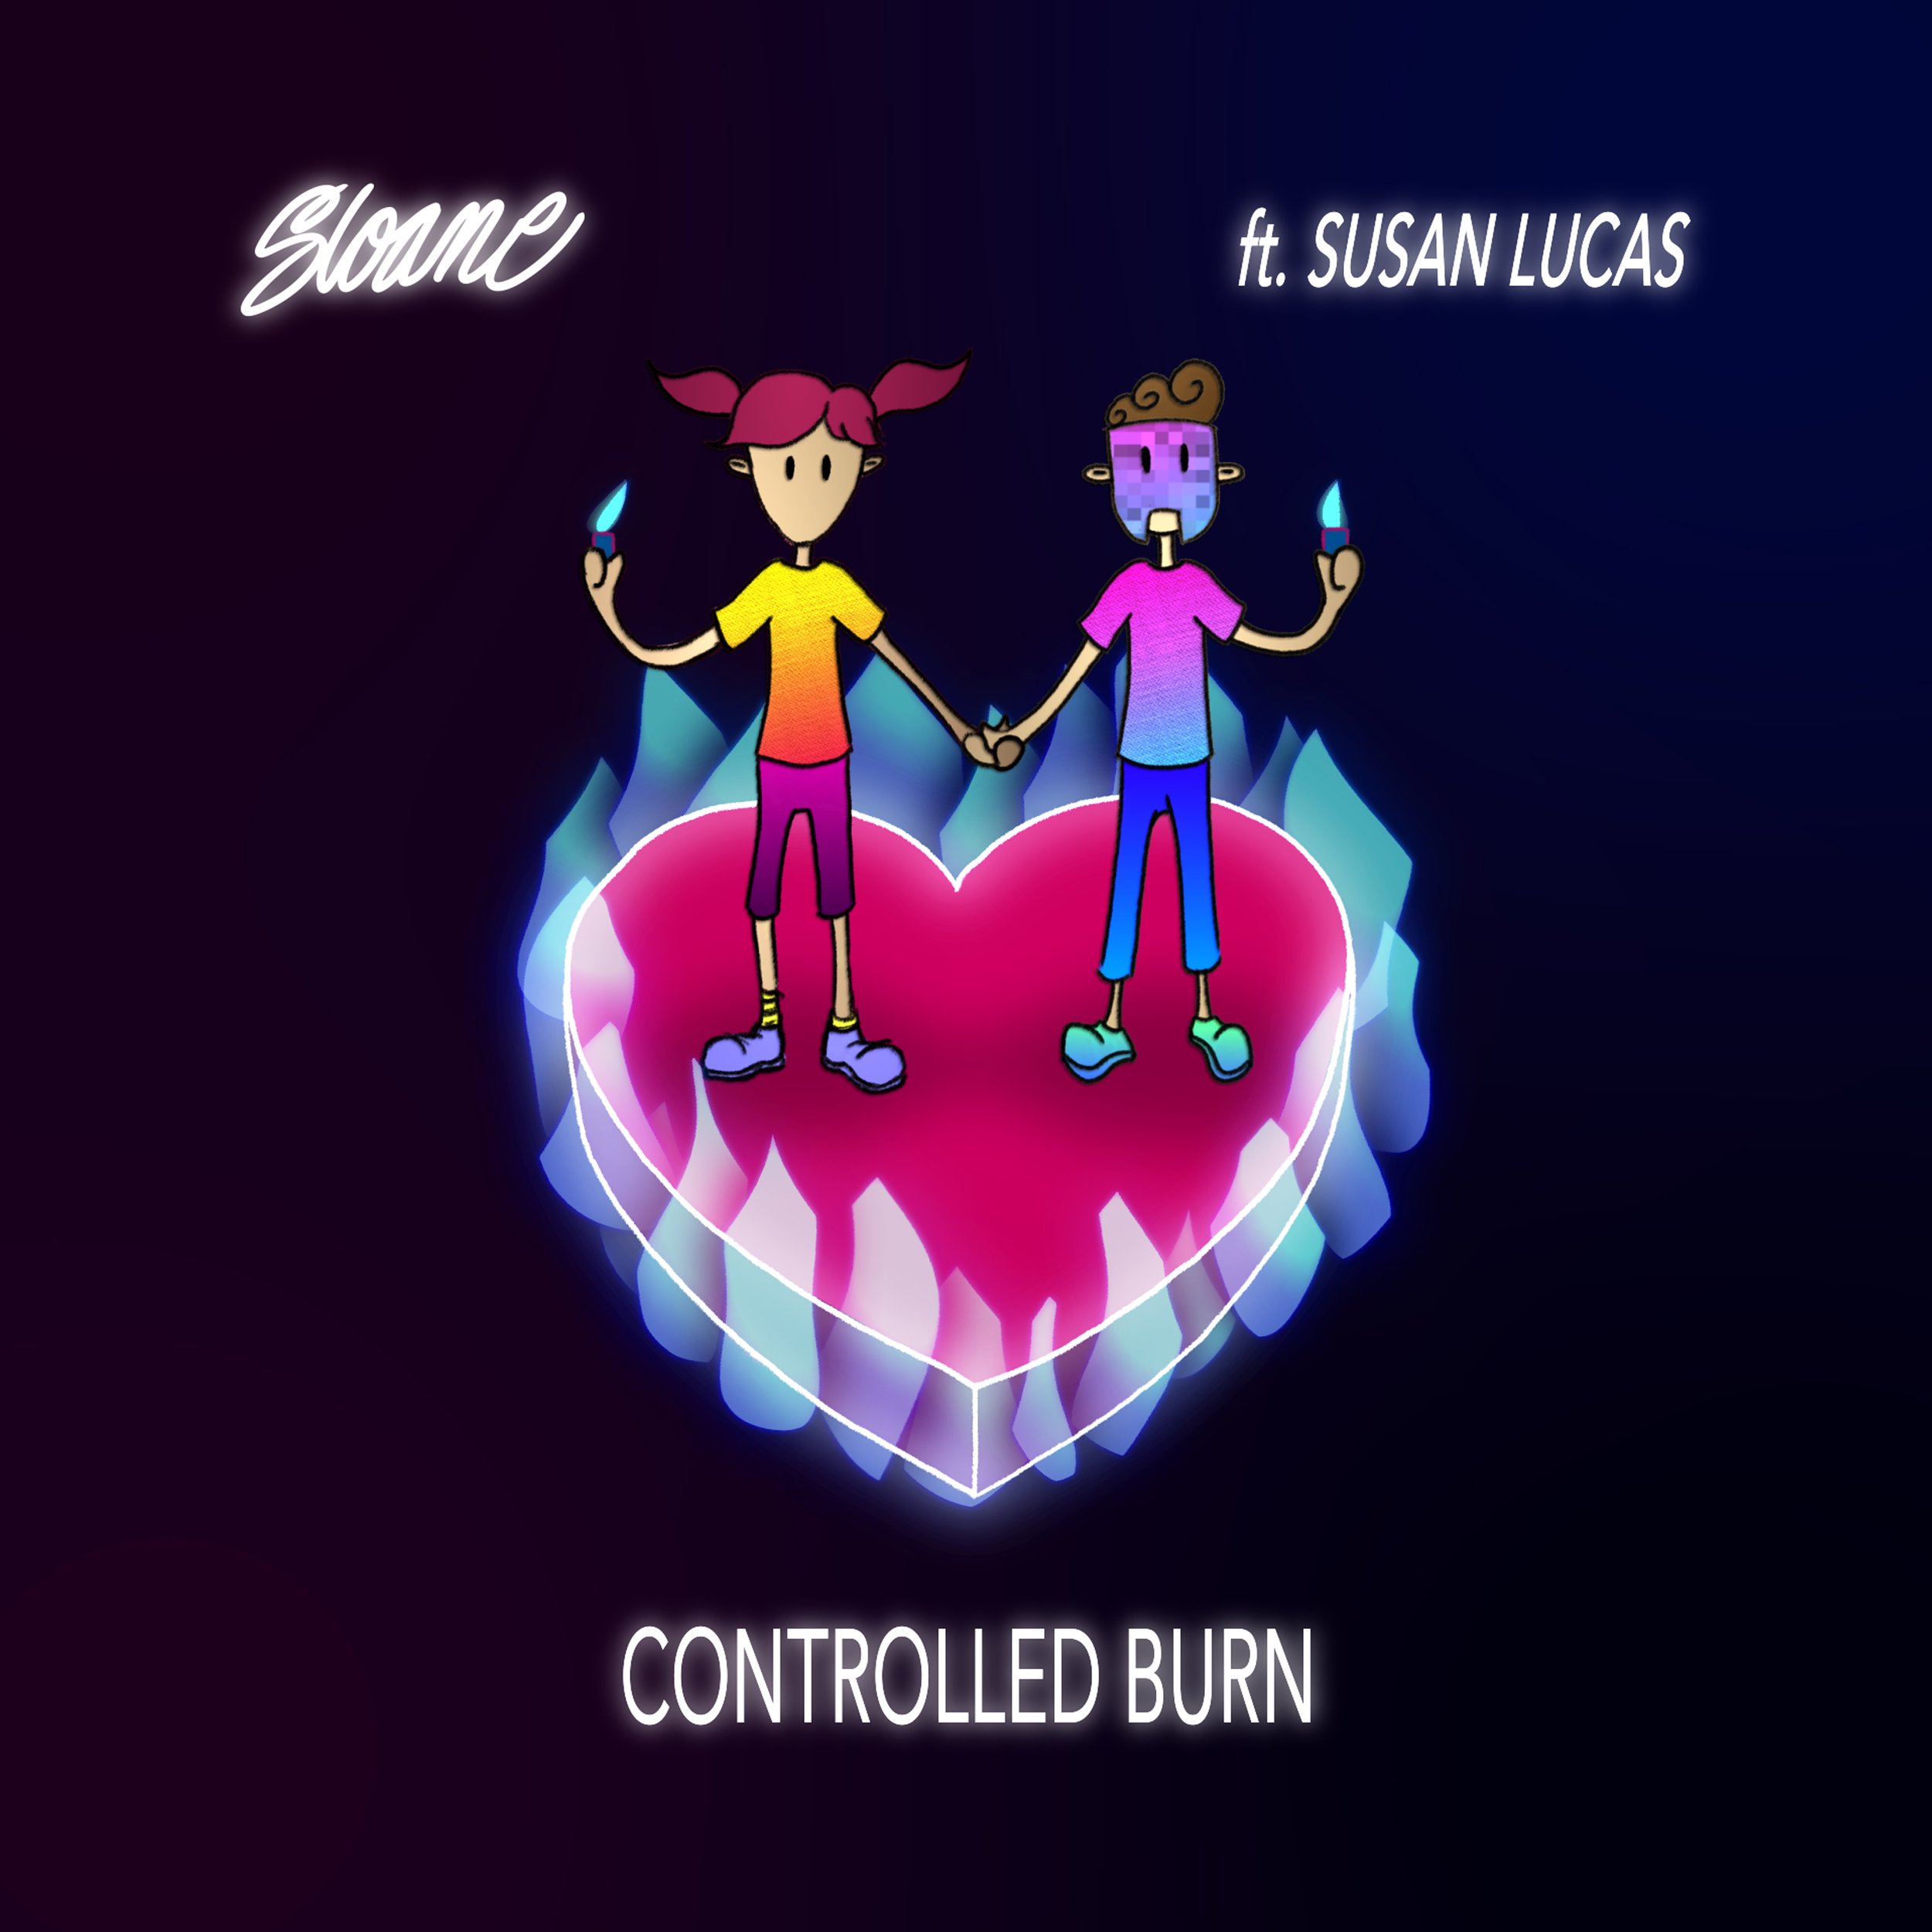 Listen to "Controlled Burn" by Sloane